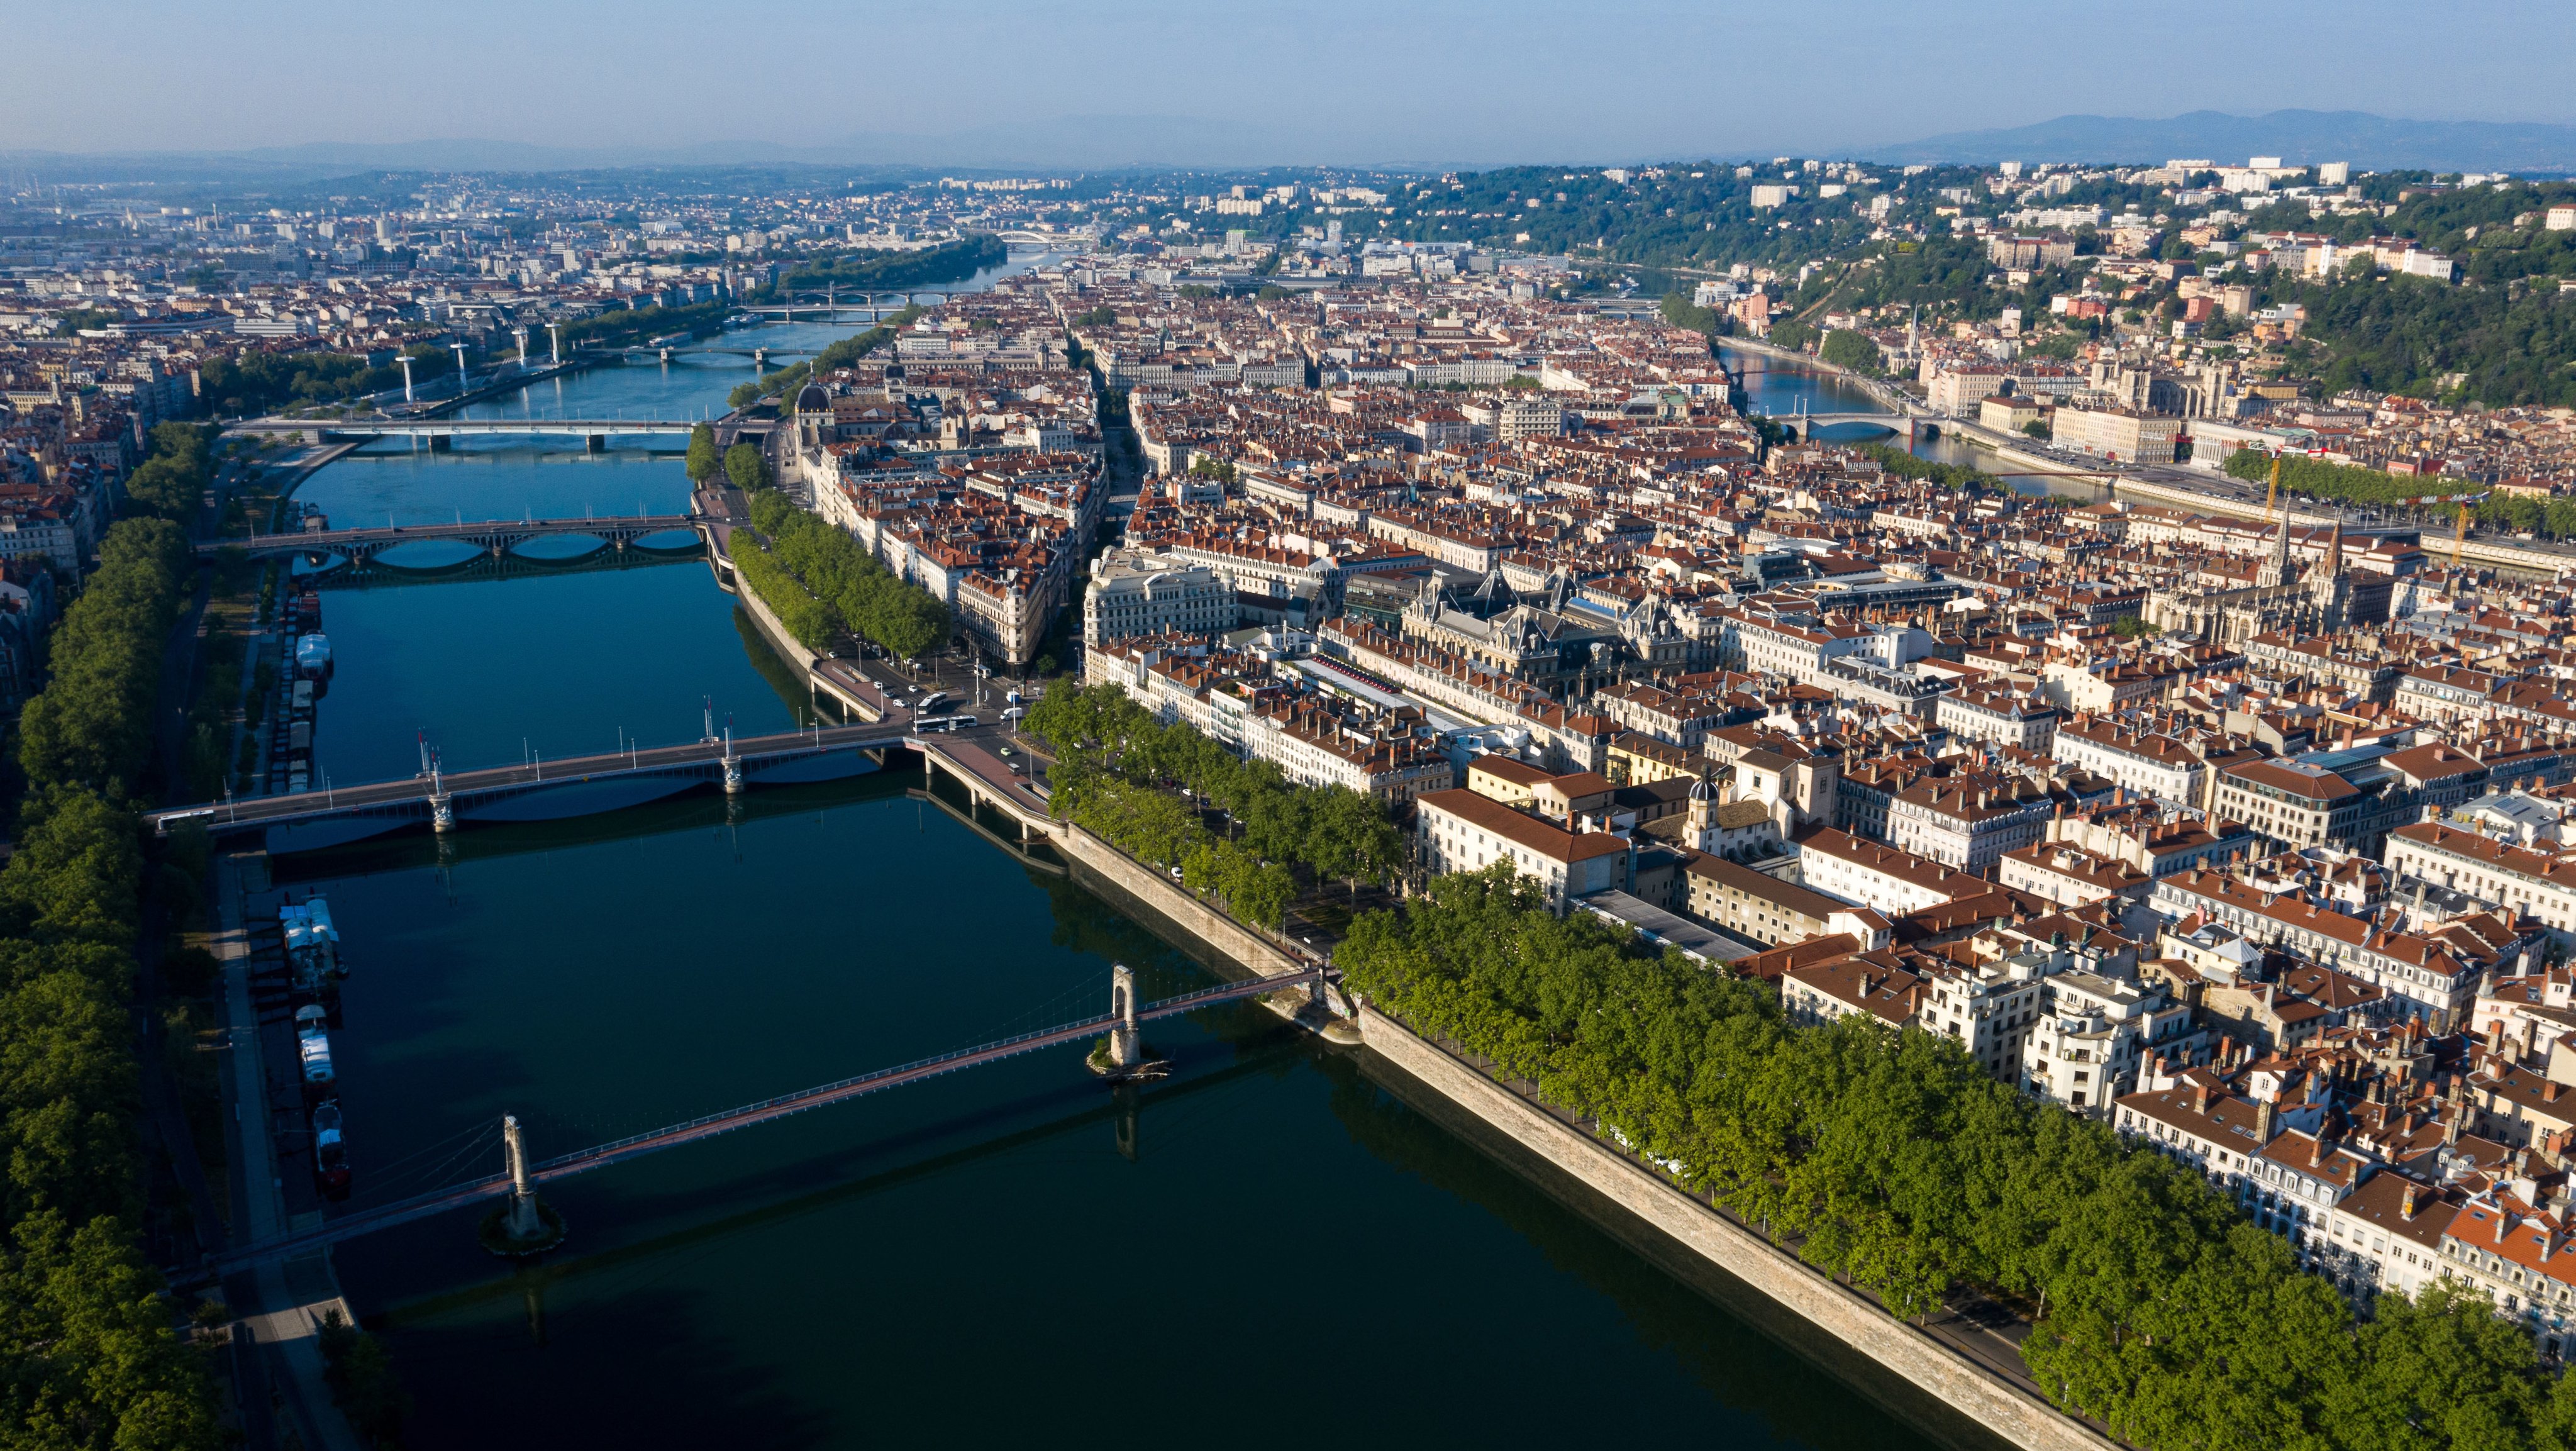 Lyon (central-eastern France): aerial view of the banks of the River Rhone and the peninsula